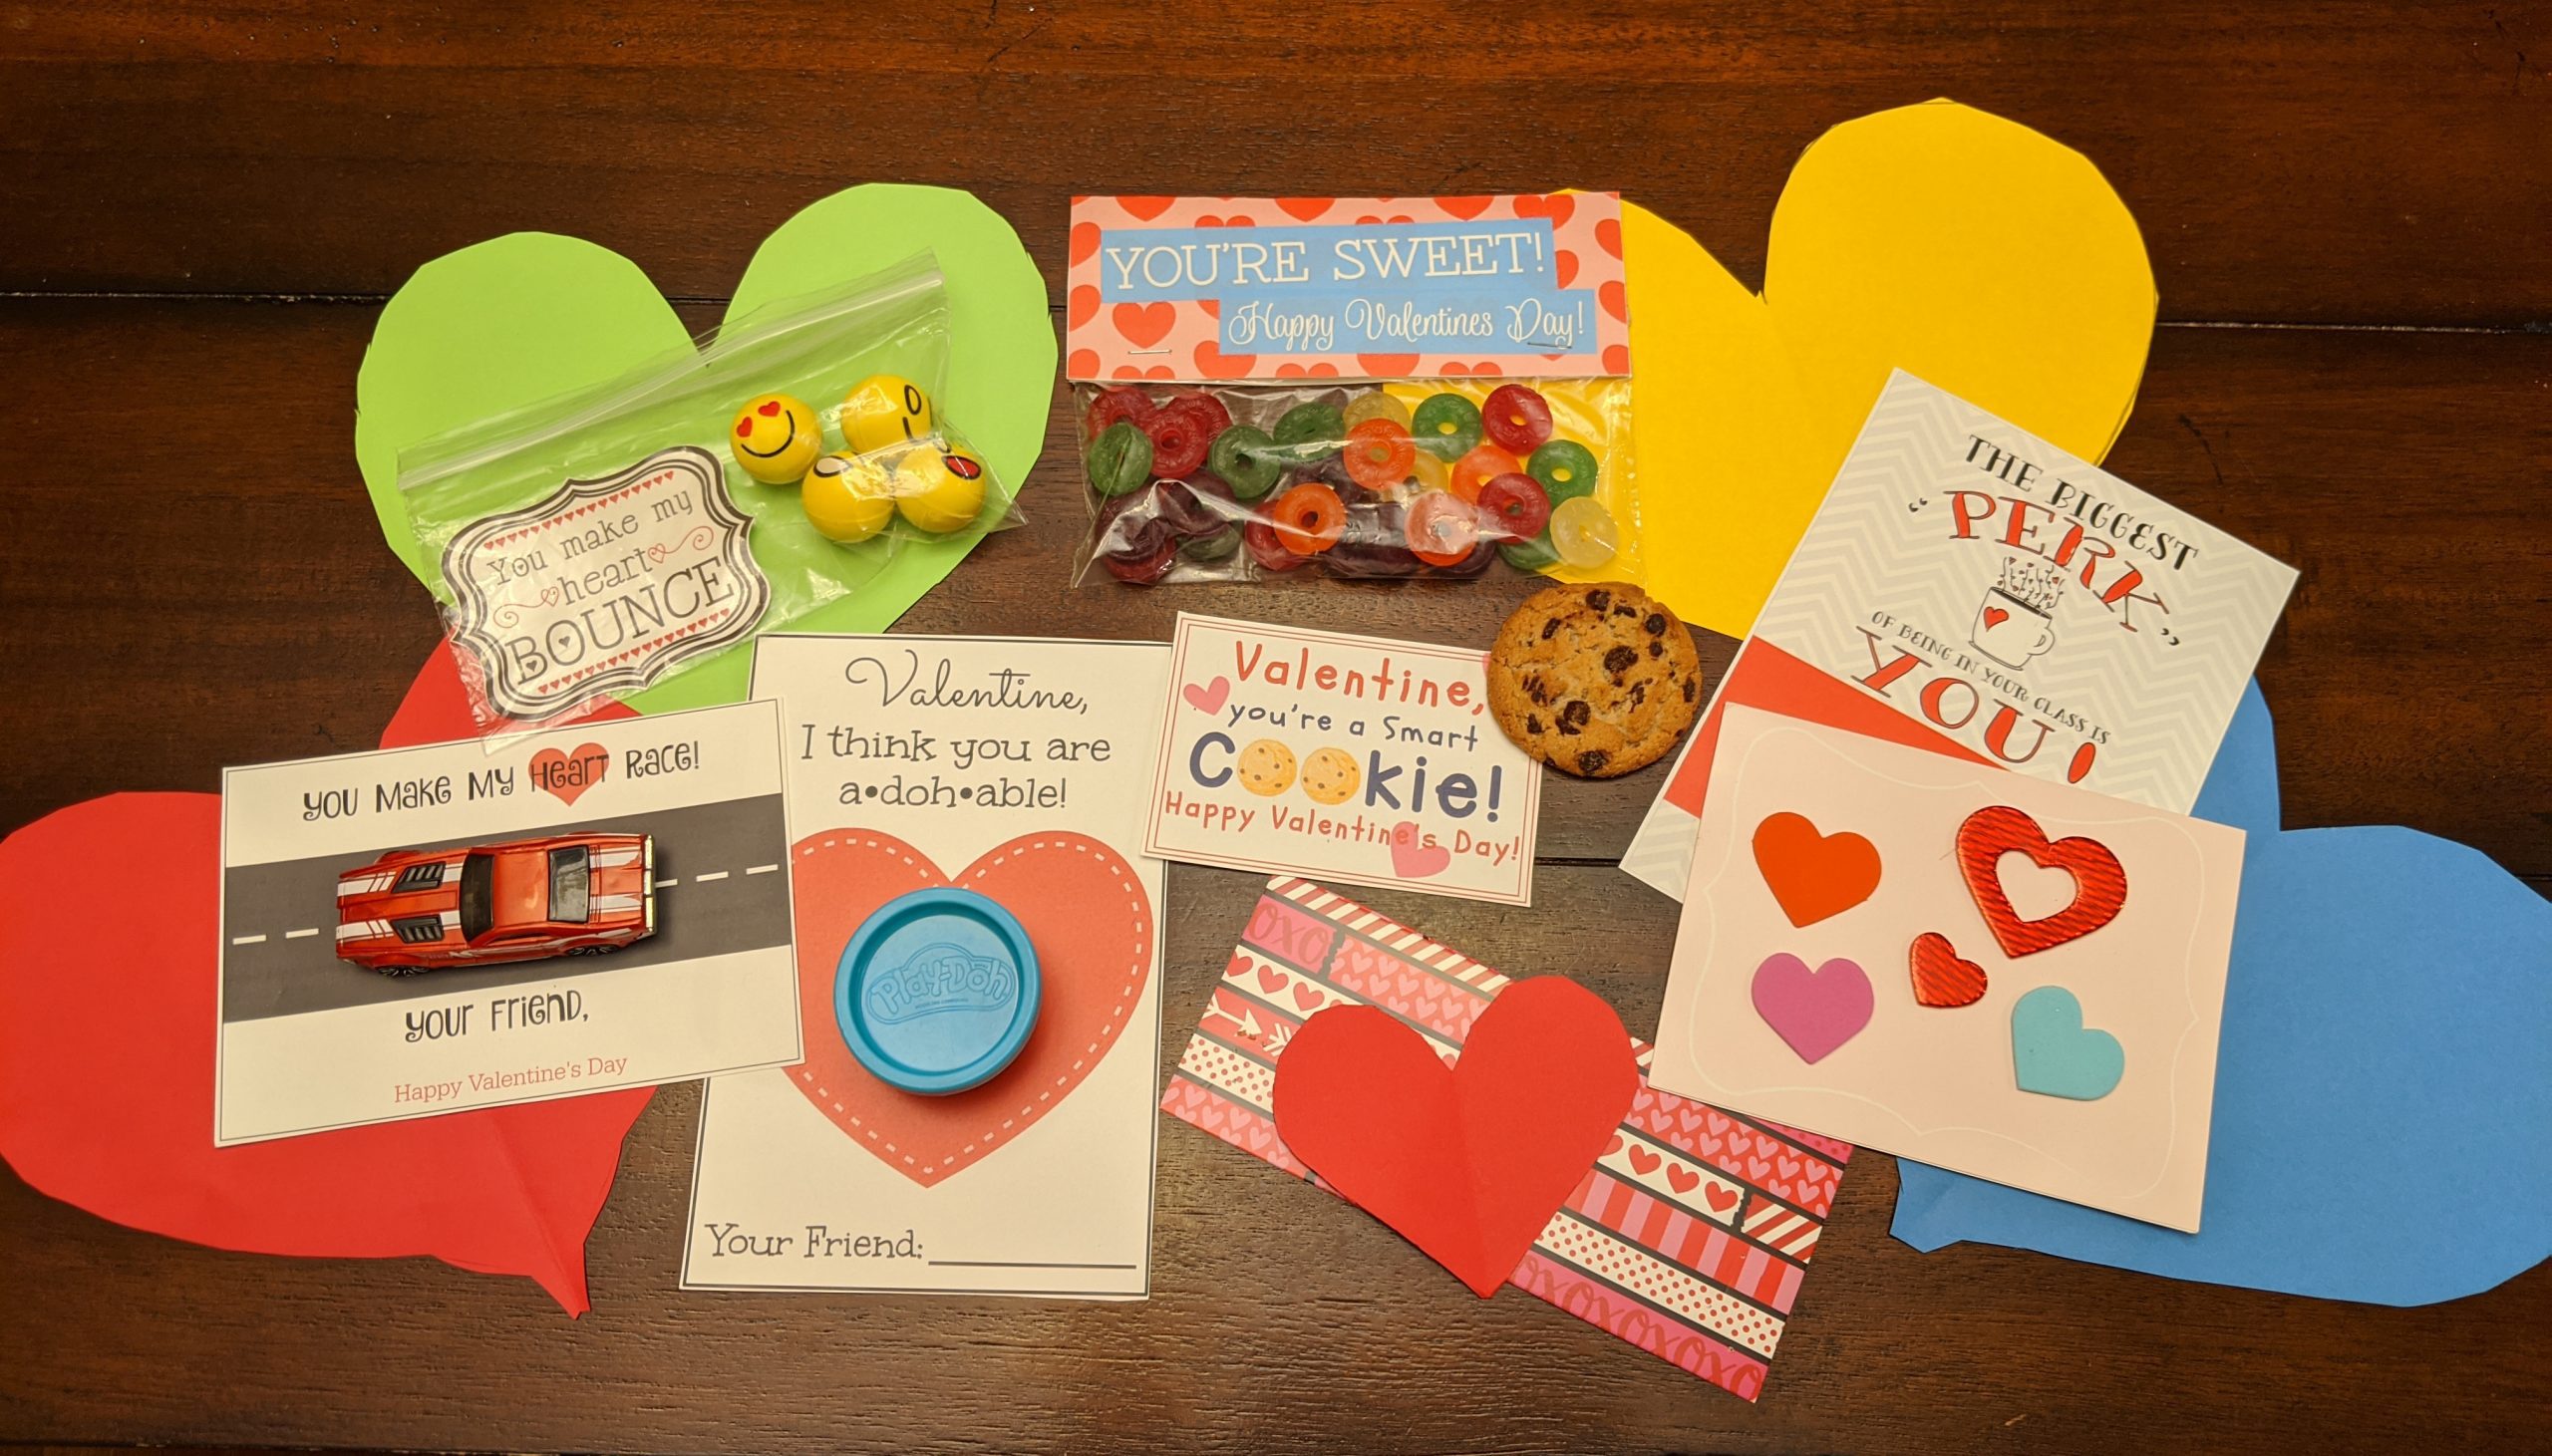 valentine's day cards for preschoolers to make